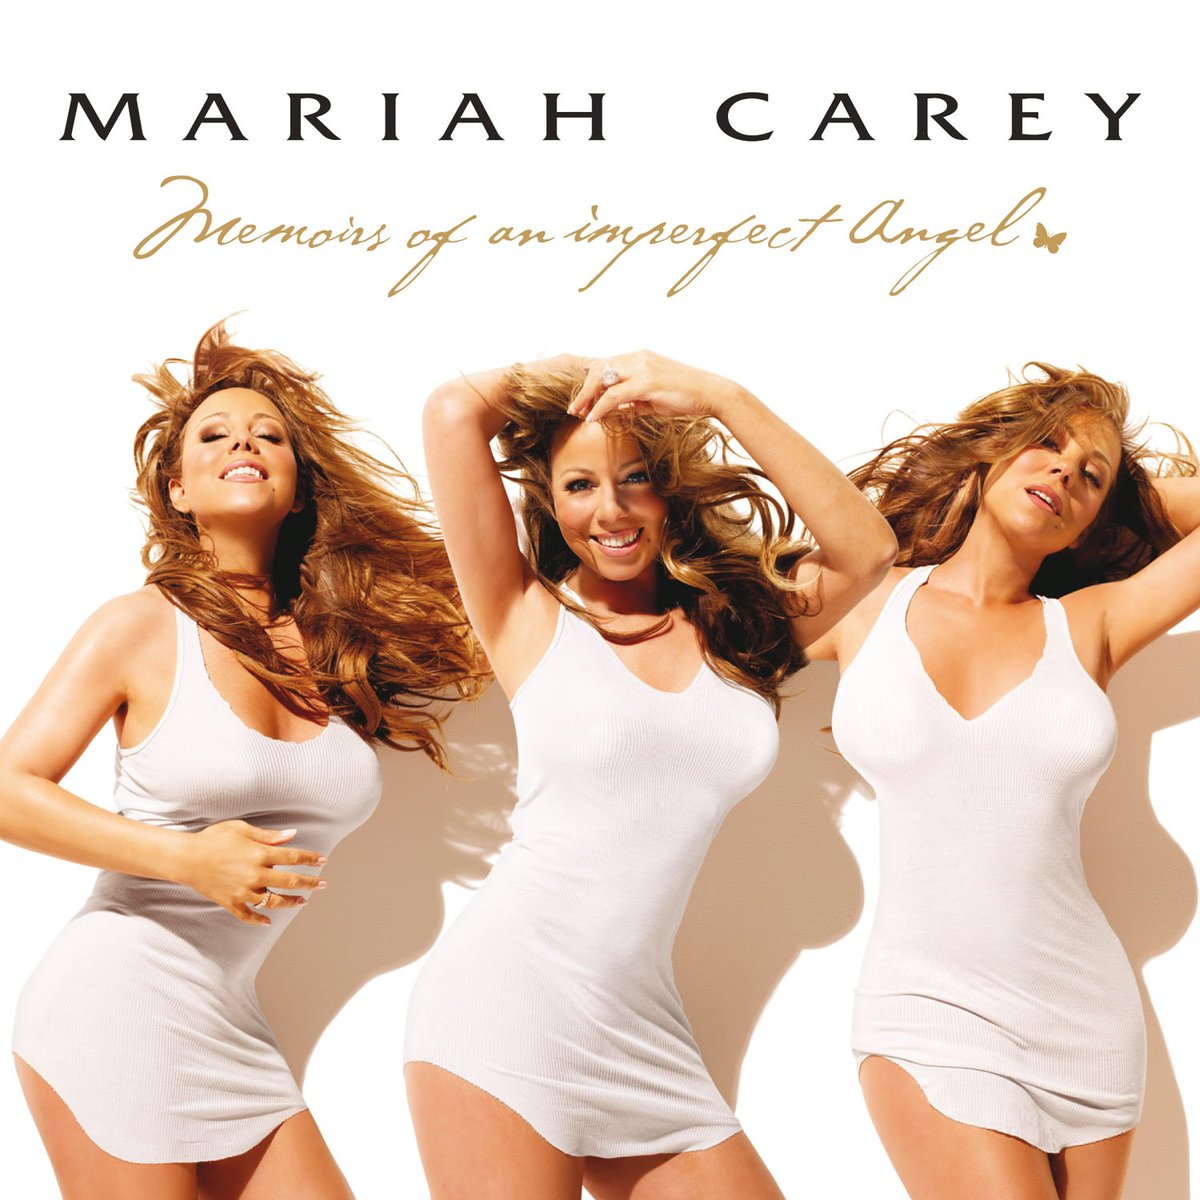 Mariah Carey Charts On Twitter Greatest Hits Memoirs Of An Imperfect Angel And Me I Am Mariah The Elusive Chanteuse Have All Re Entered The Itunes Us Chart Https T Co Ji9bqi2txk